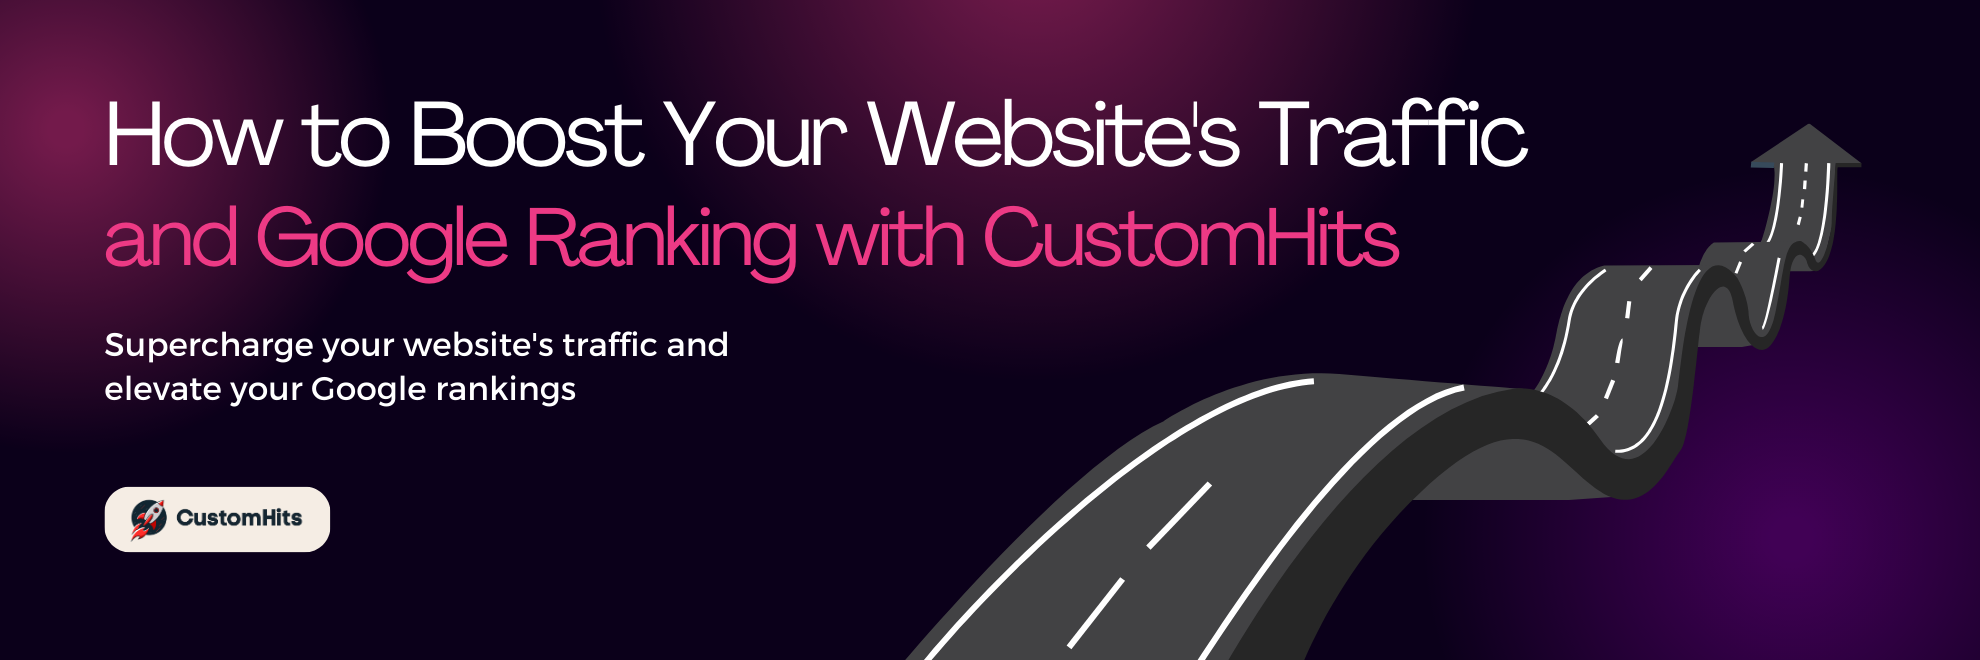 How to Boost Your Website's Traffic and Google Ranking with CustomHits